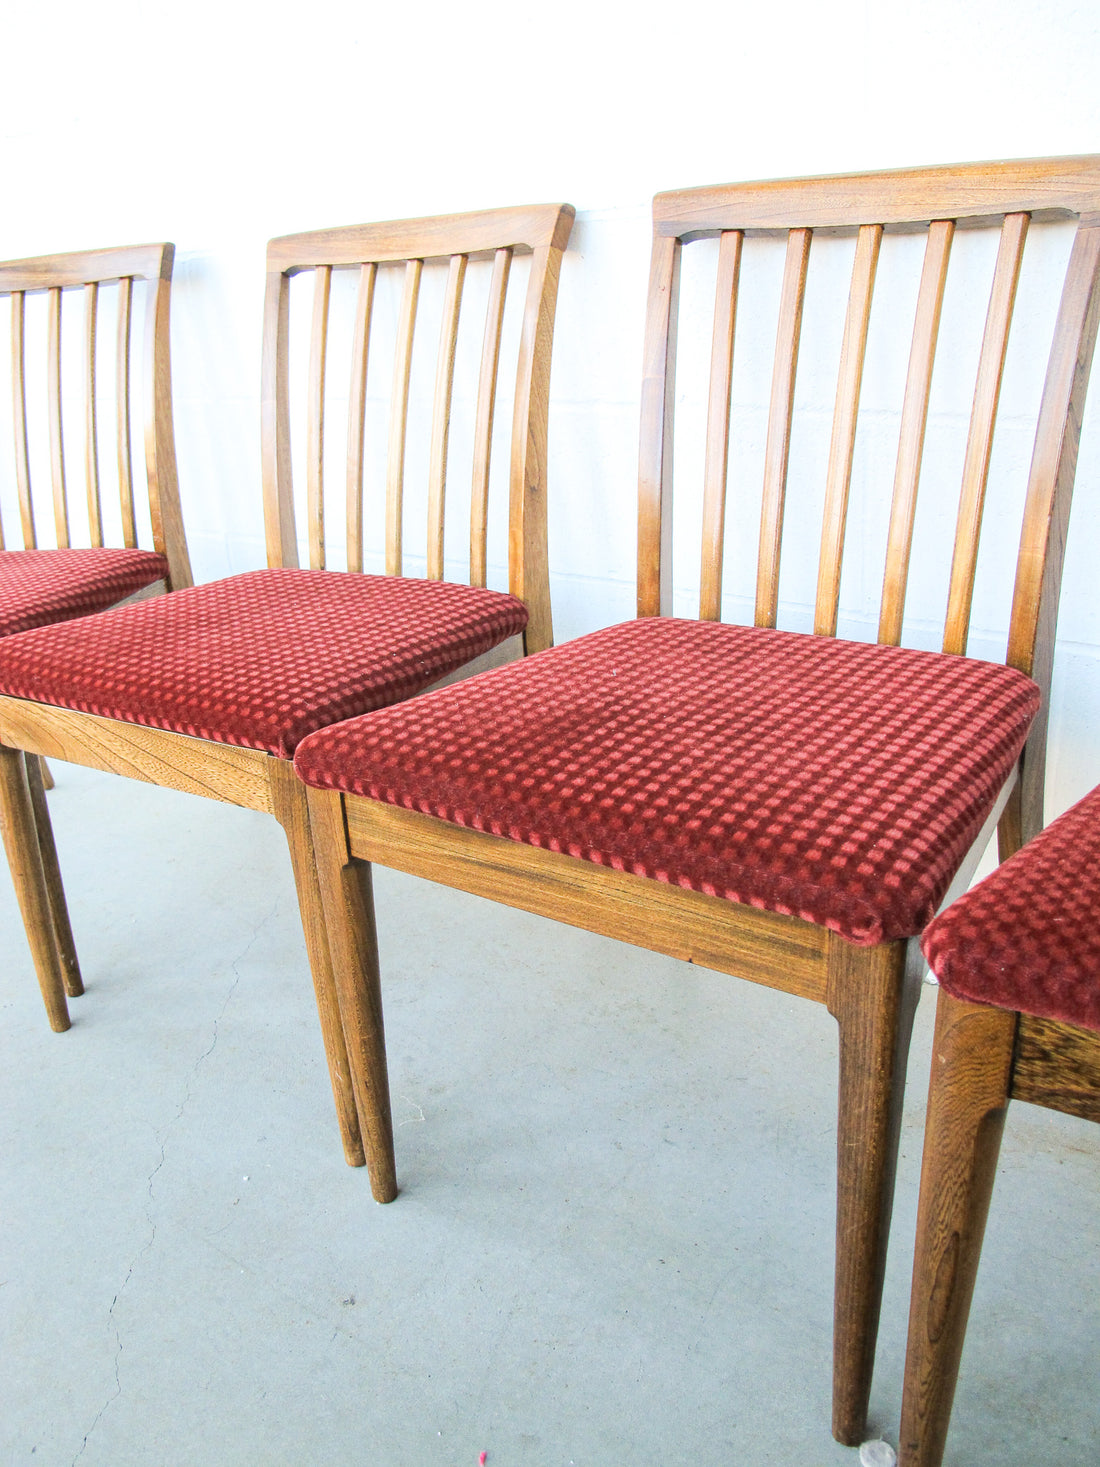 Set of 4 Midcentury Wood Dining Chairs with Upholstered Seats